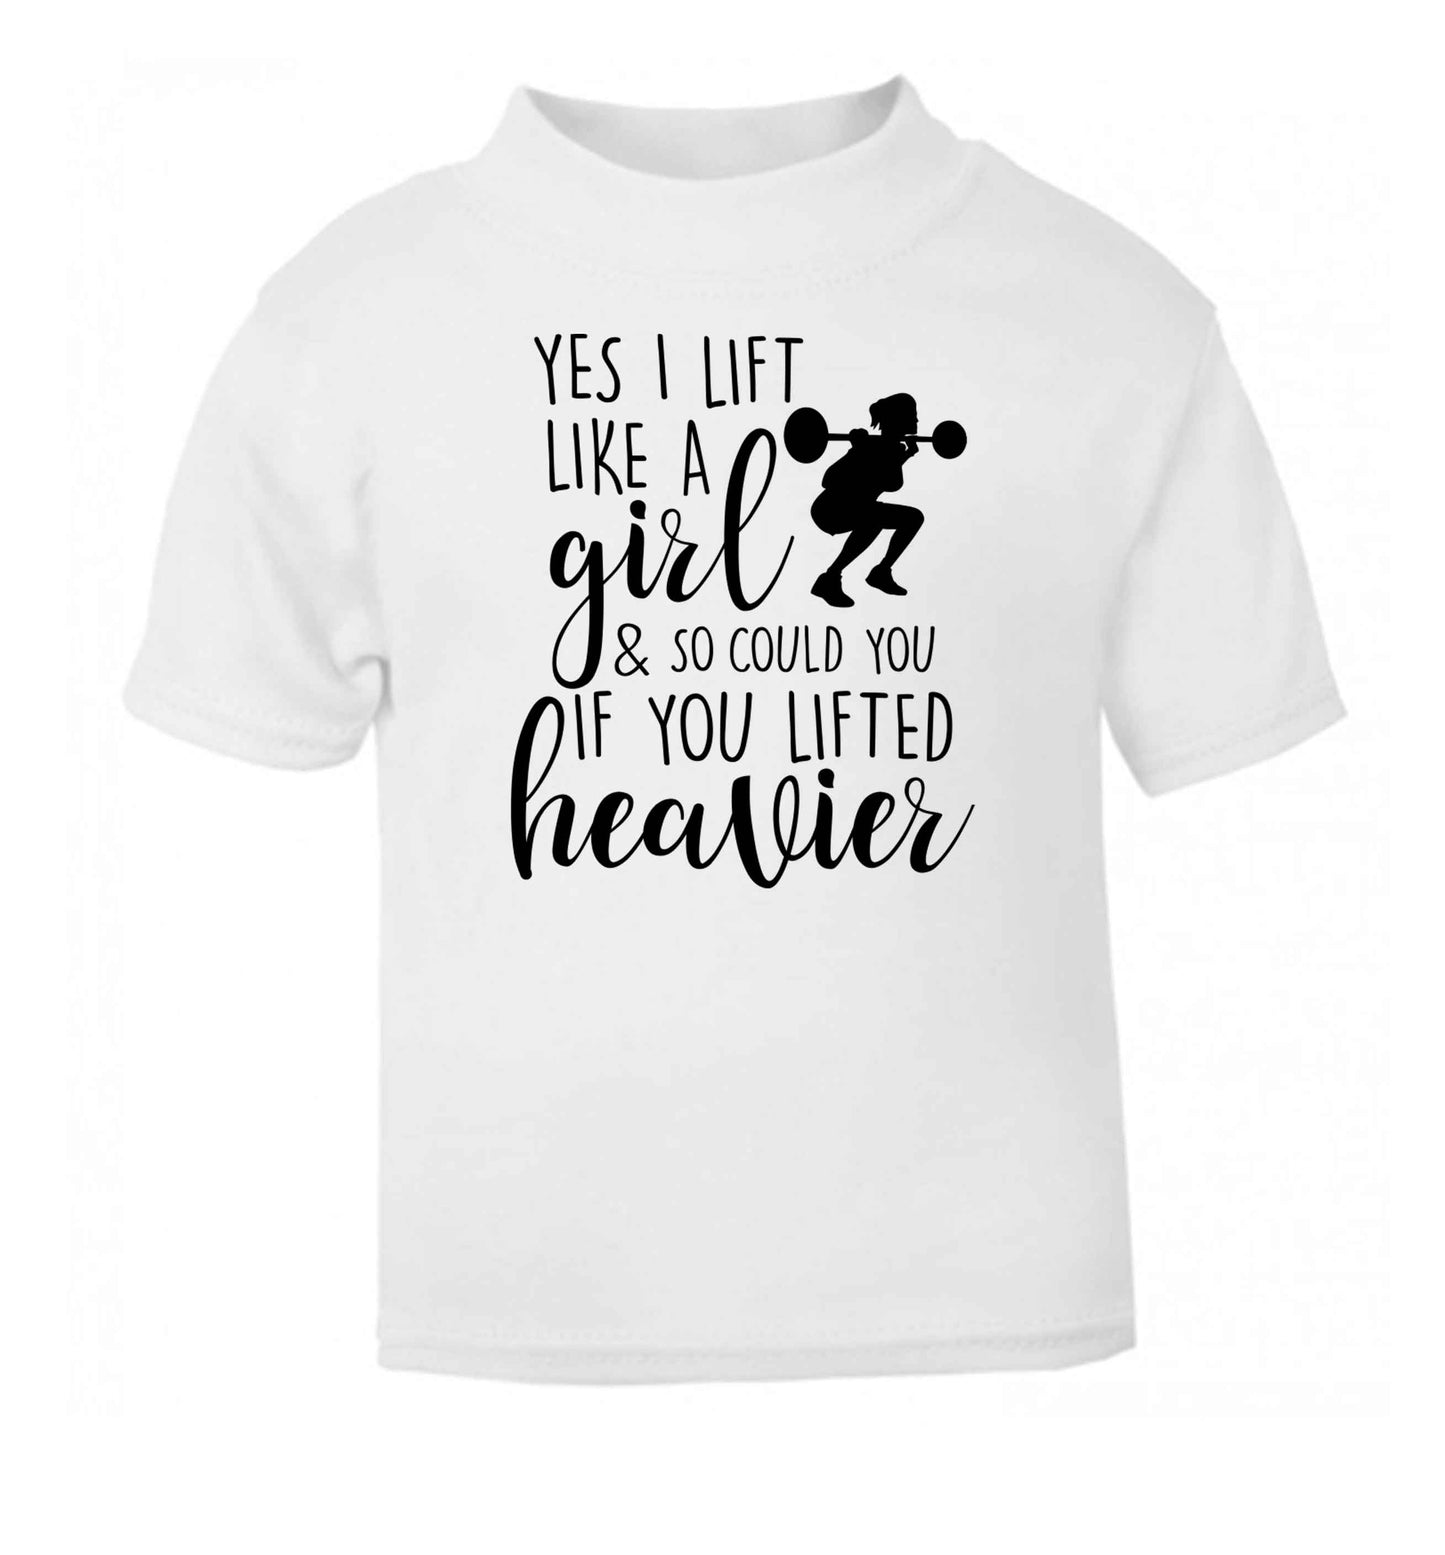 Yes I lift like a girl and so could you if you lifted heavier white Baby Toddler Tshirt 2 Years